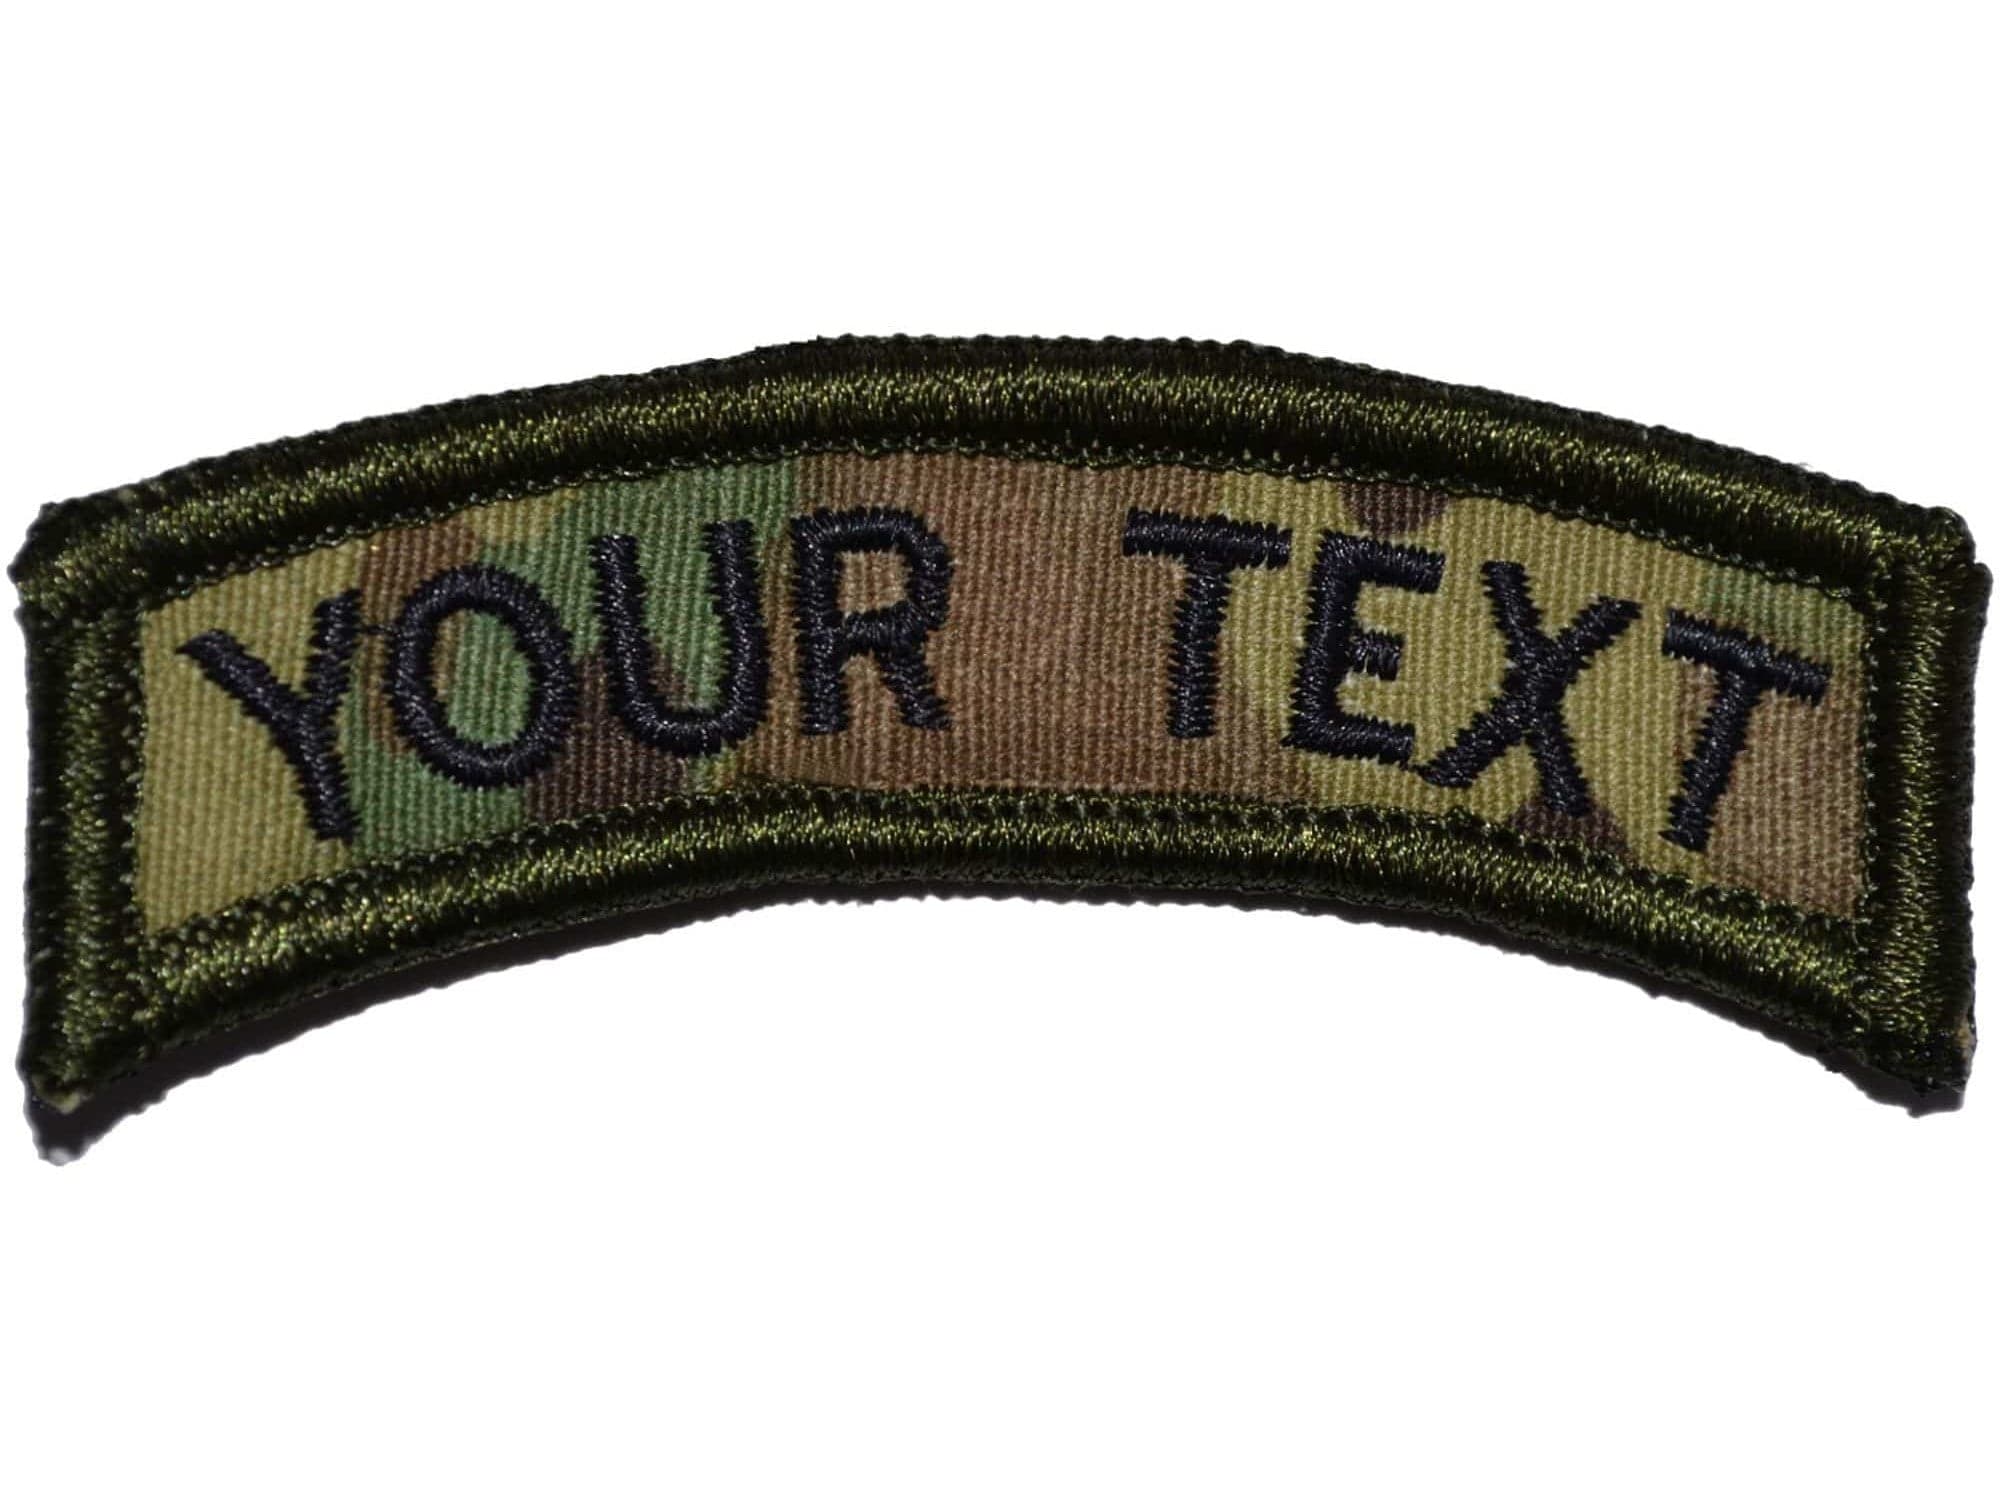 Tactical Gear Junkie - Custom Morale Patches & Accessories